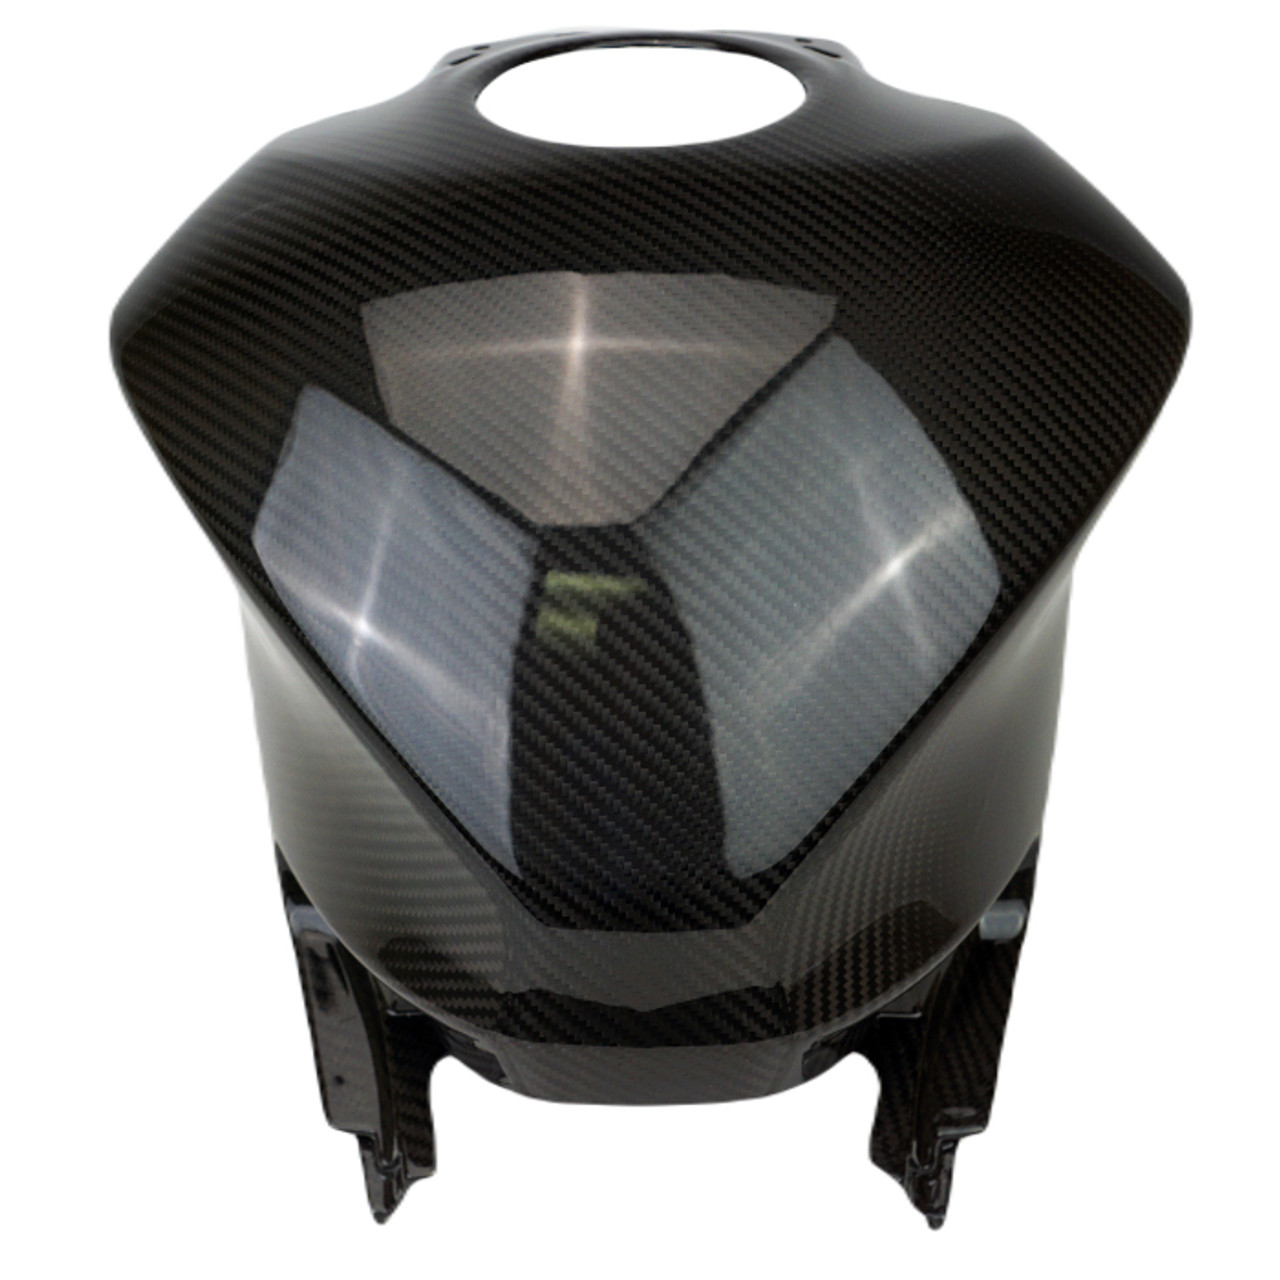 Rear Tank Cover in Glossy Twill Weave Carbon Fiber for Yamaha R3, R25 2019+ 

